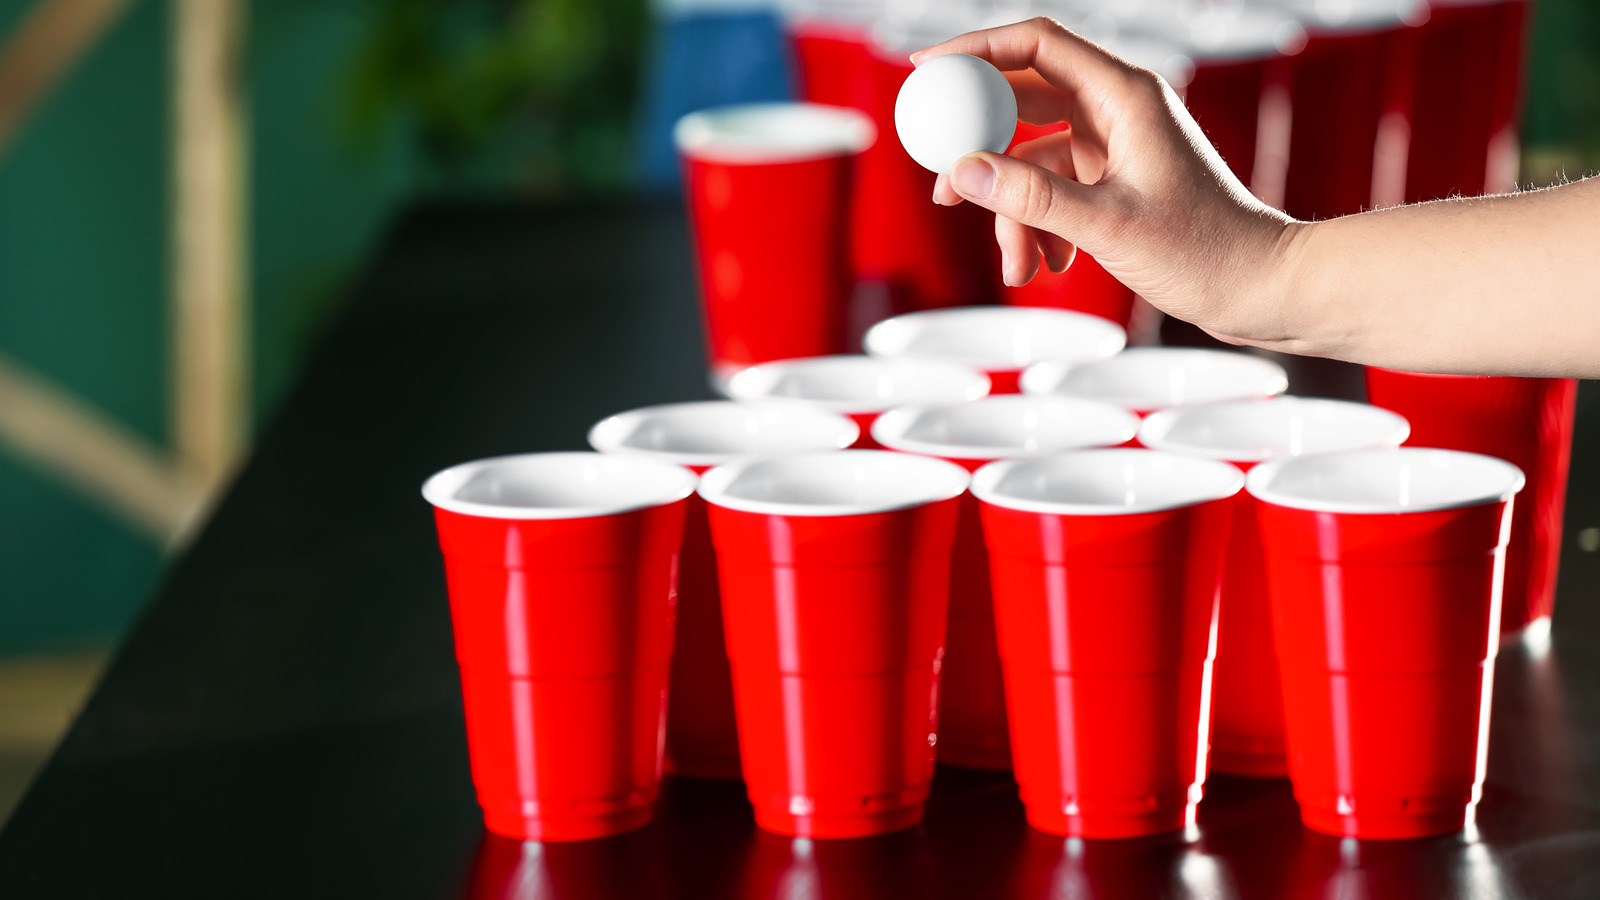 https://www.mashed.com/img/gallery/if-you-liked-playing-beer-pong-in-college-youll-love-the-drinking-game-beirut/l-intro-1687293943.jpg